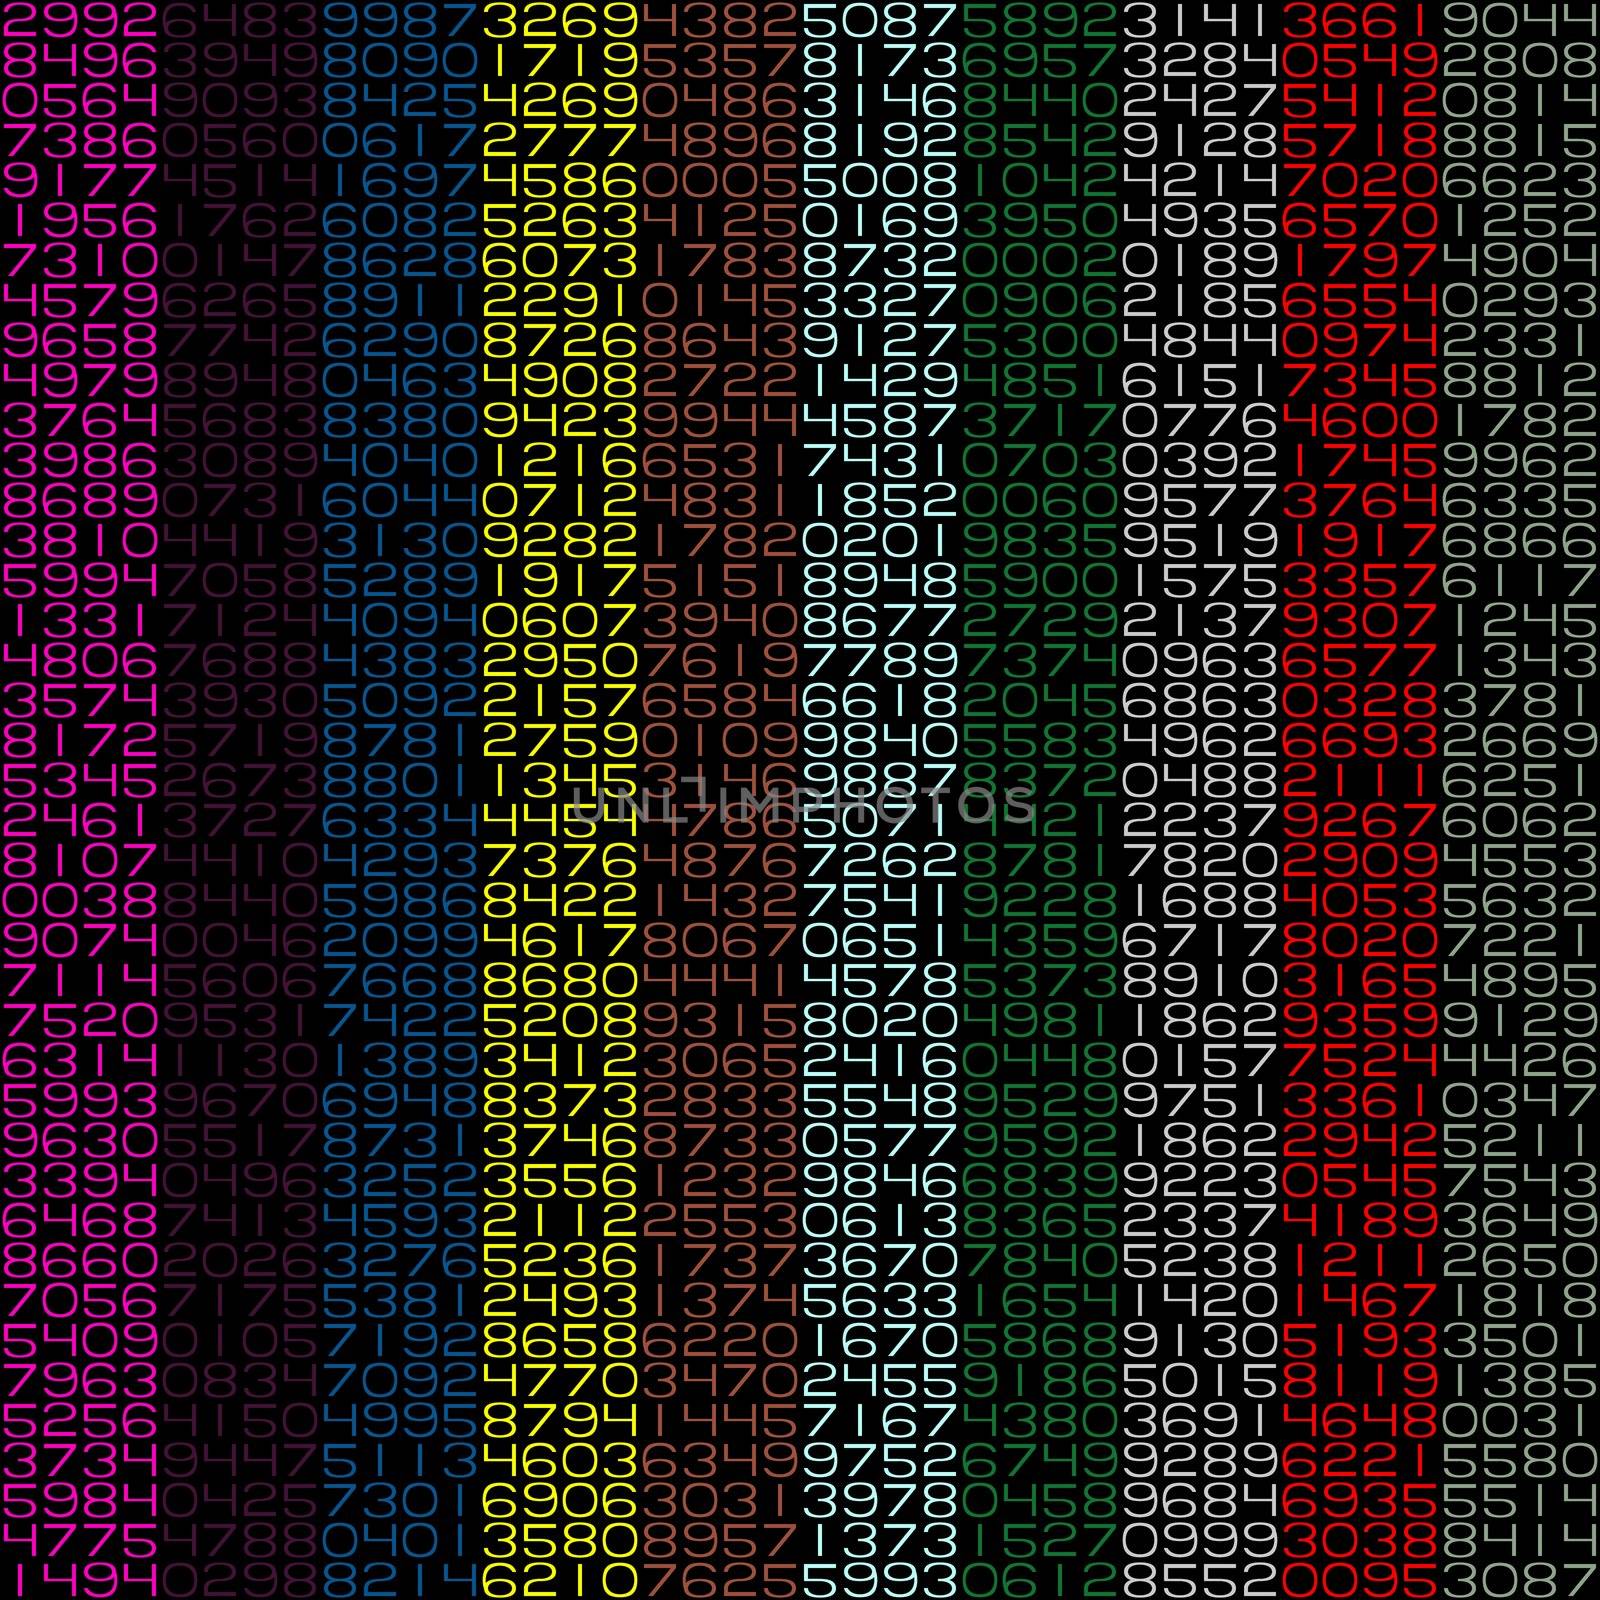 vertical chains of numbers in different colors 